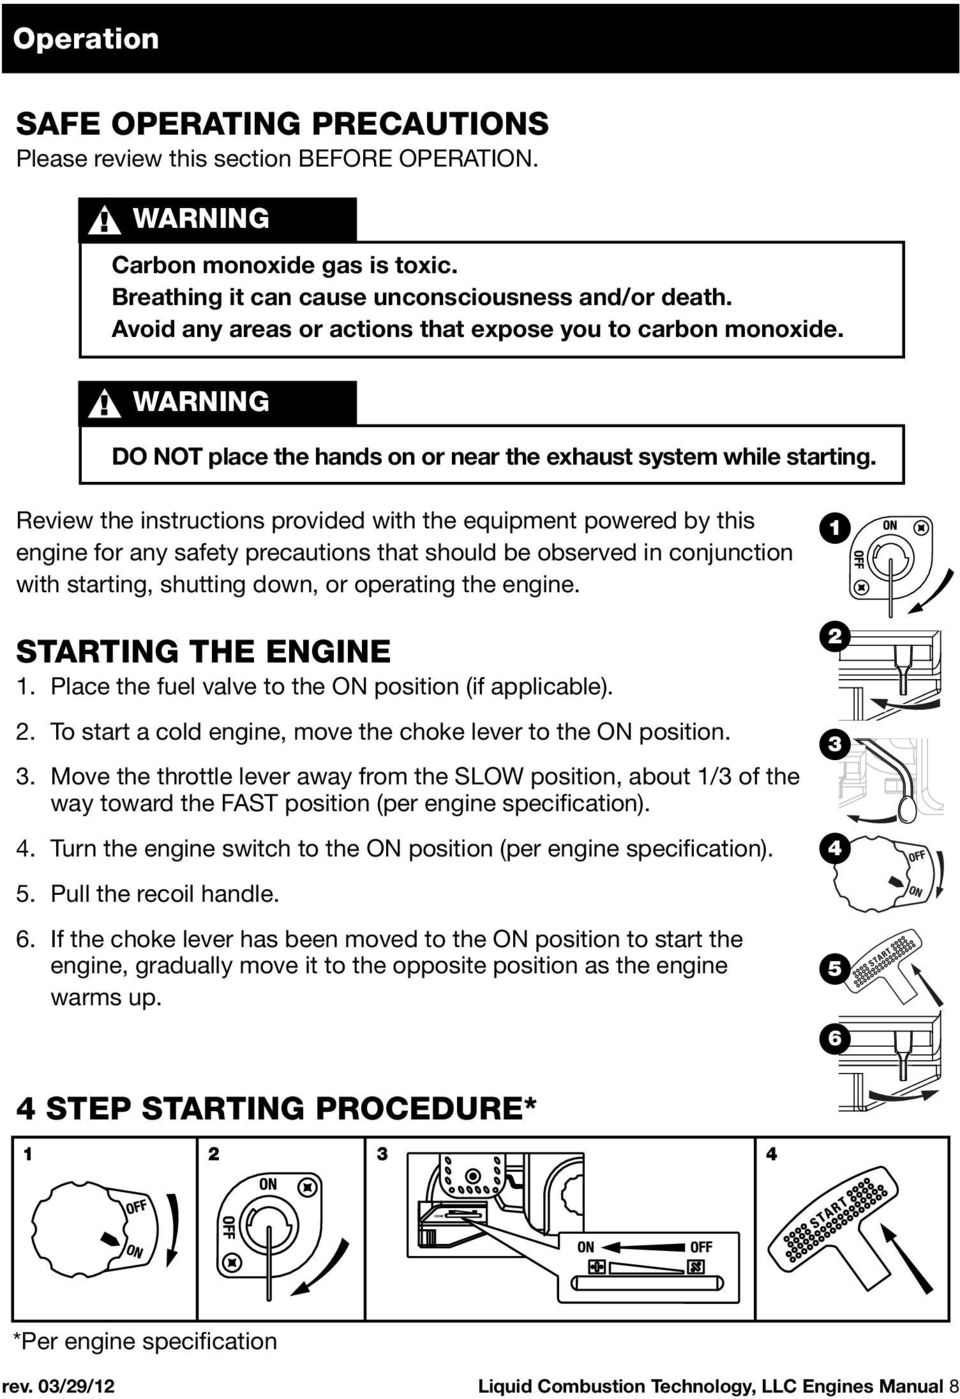 Review the instructions provided with the equipment powered by this engine for any safety precautions that should be observed in conjunction with starting, shutting down, or operating the engine.